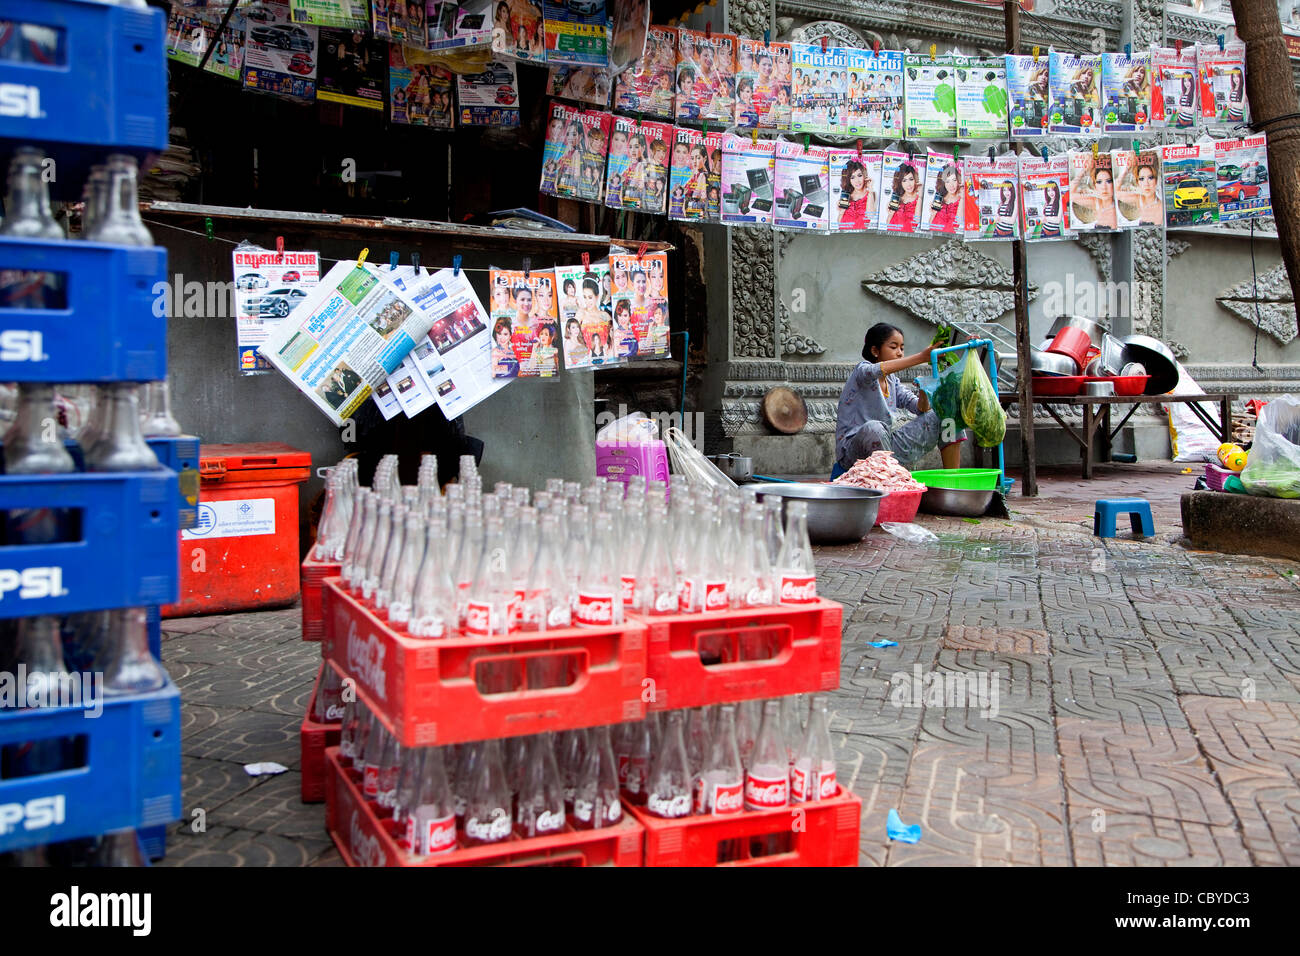 Kiosk selling newspapers and magazines and traditional restaurant on the street with Coke and Pepsi, Phnom Penh, Cambodia, Asia Stock Photo